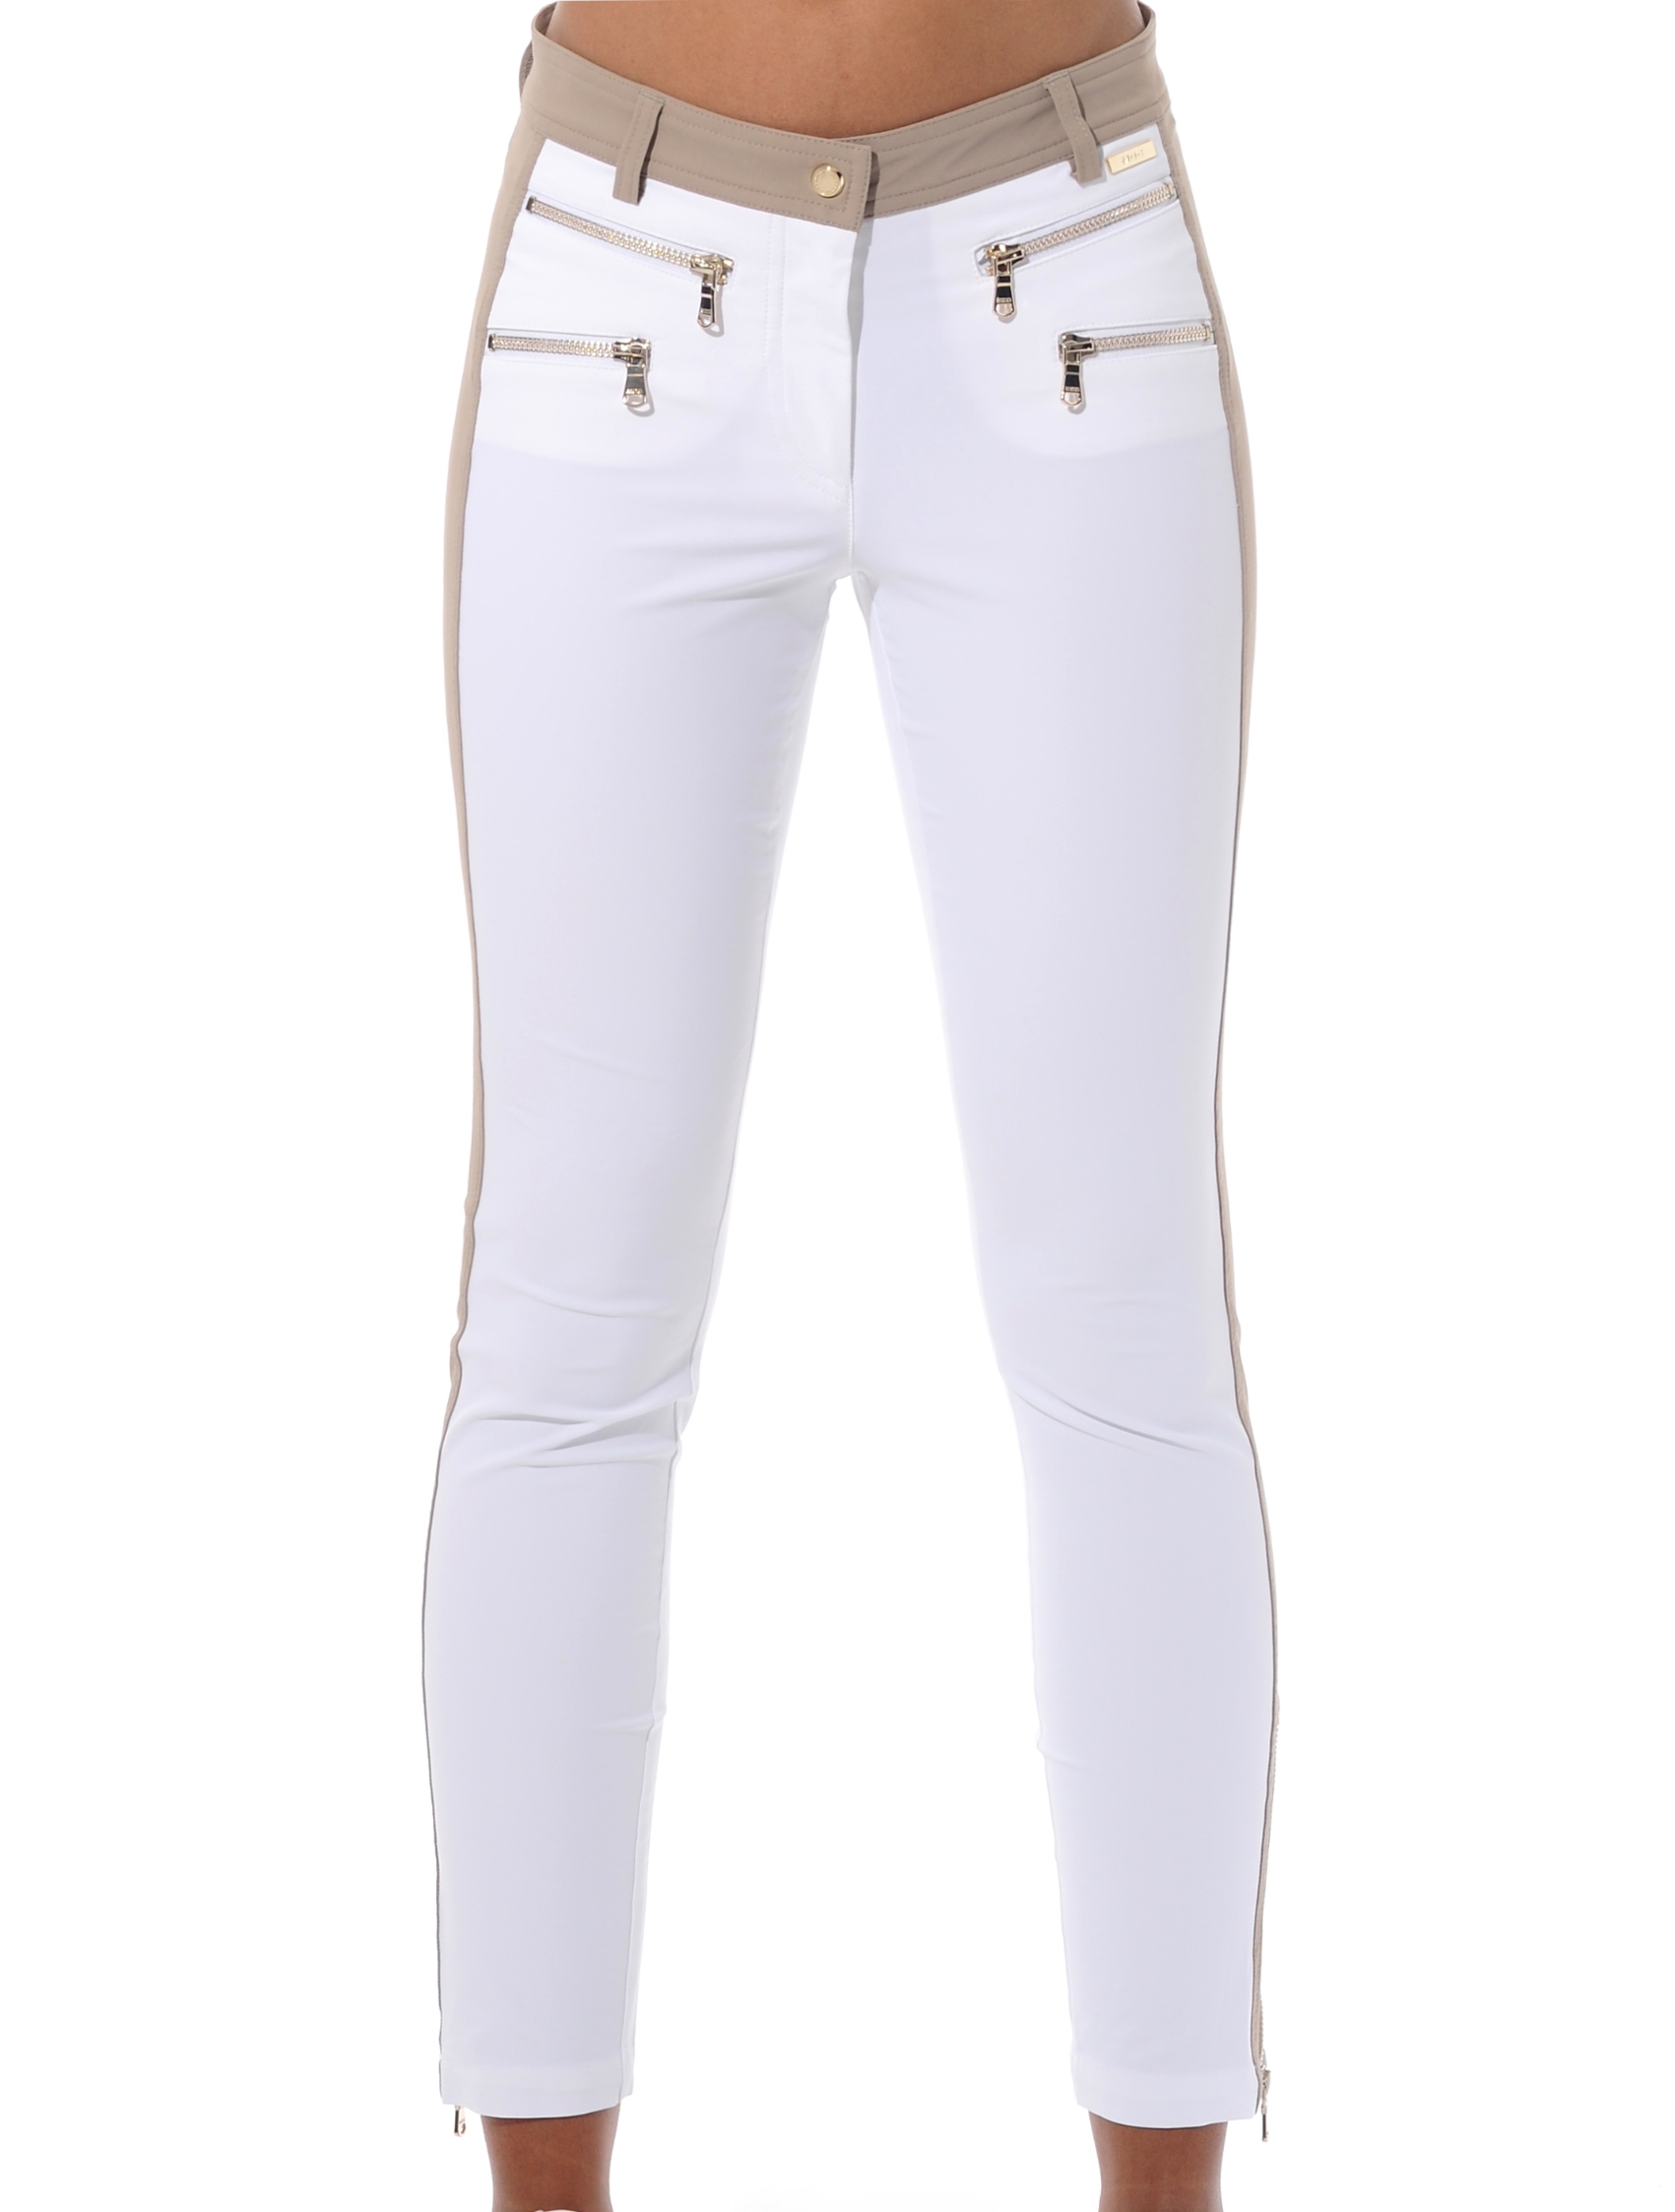 4way stretch double zip ankle pants white/taupe 